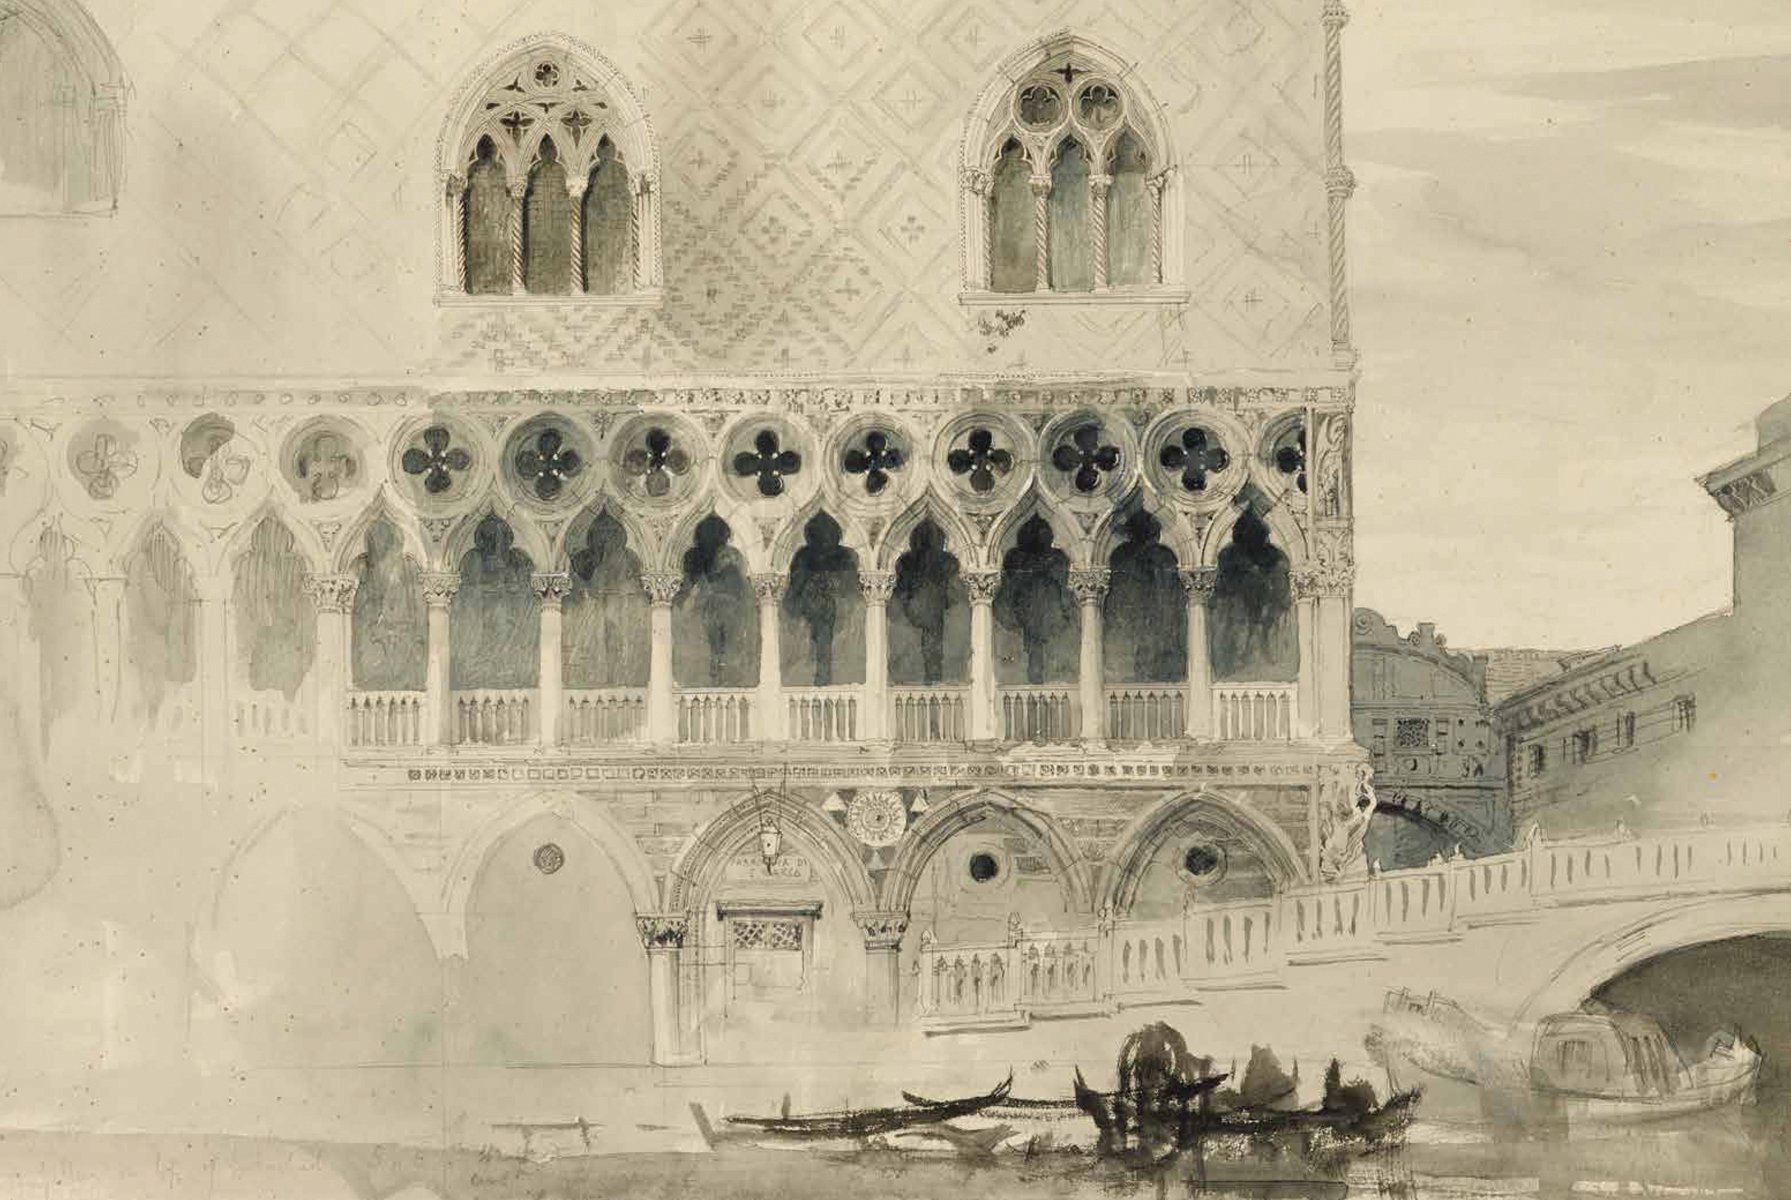 Detailed sketch of York minster cathedral façade, on cover of 'An Instinct to Draw, John Ruskin's Drawings in the Ashmolean Museum', by Ashmolean Museum.